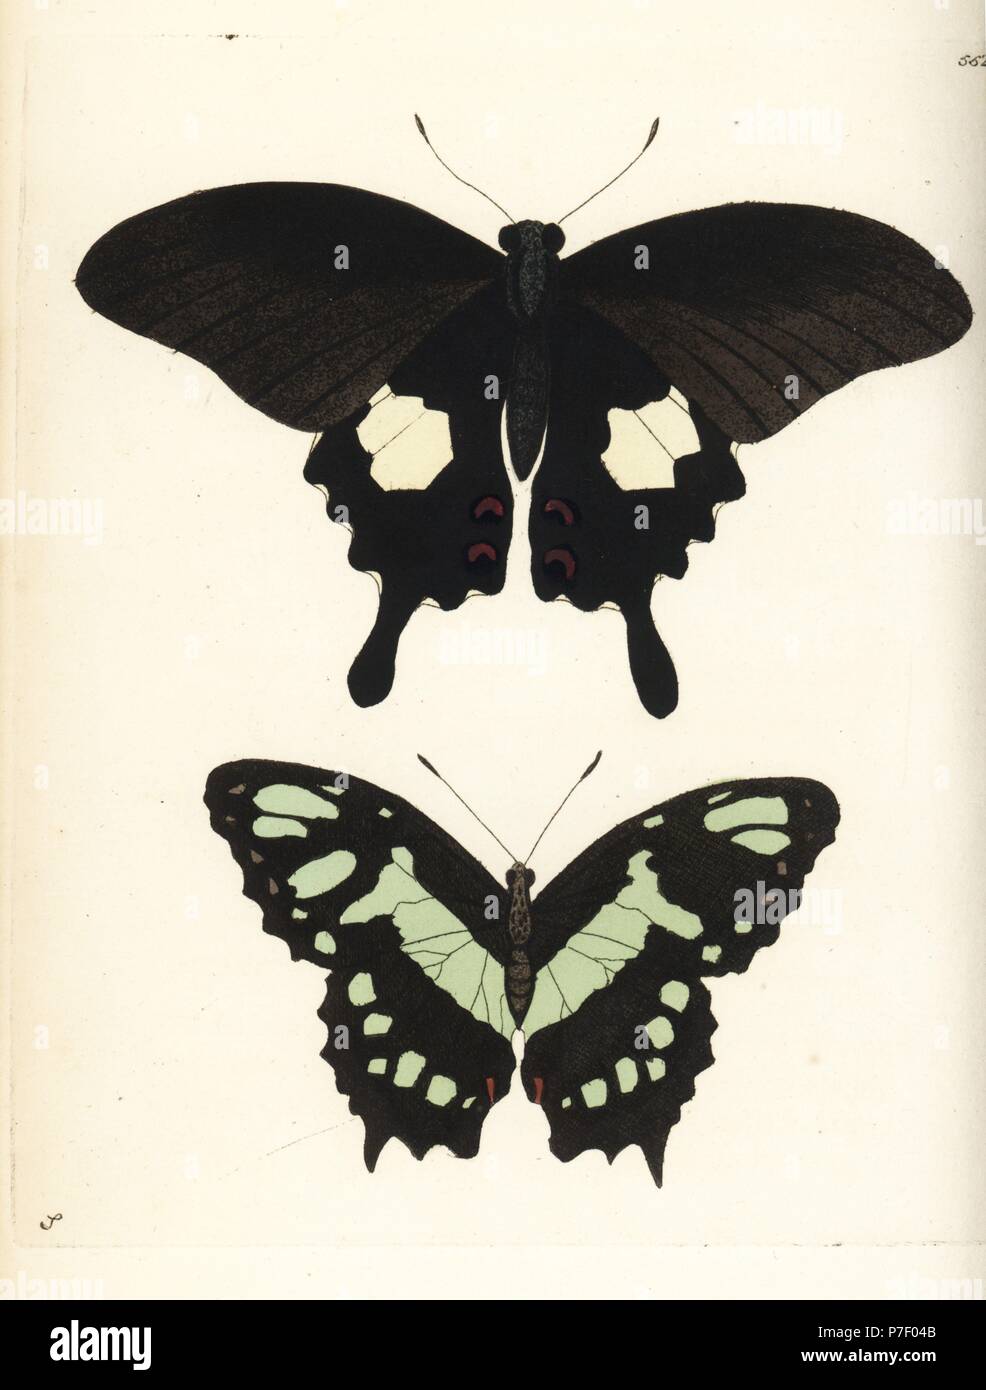 Red helen and malachite butterfly, Papilio helenus, Siproeta stelenes (Papilio helenus and Papilio steneles). Illustration drawn and engraved by Richard Polydore Nodder. Handcoloured copperplate engraving from George Shaw and Frederick Nodder's The Naturalist's Miscellany, London, 1802. Stock Photo